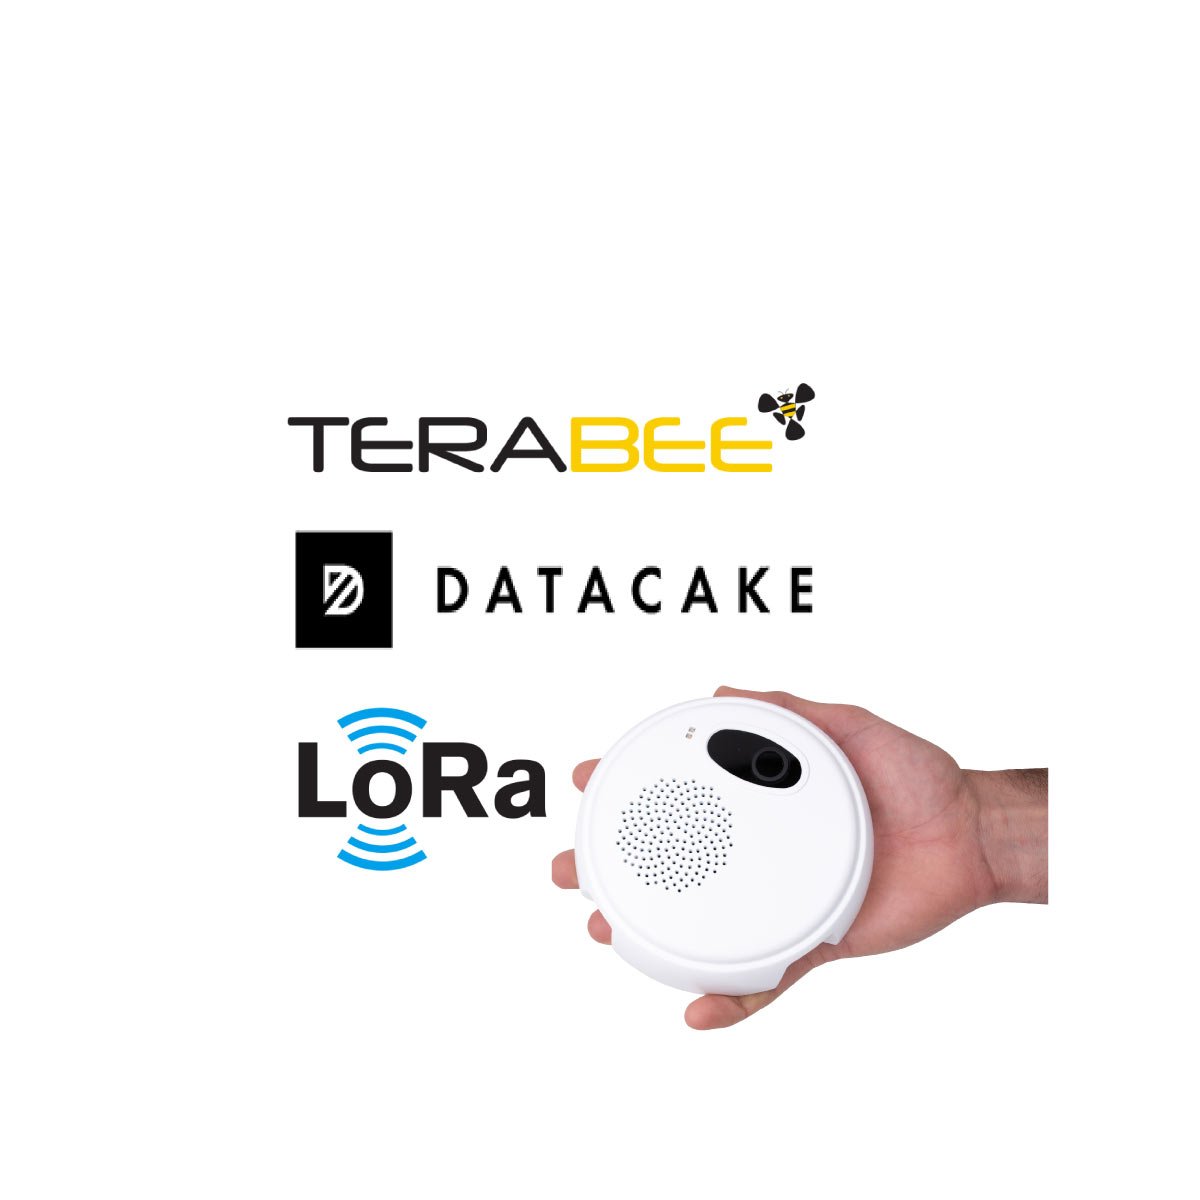 Terabee Blog People Counting L-XL LoRa showcased on Datacake IoT platform at The Things Conference